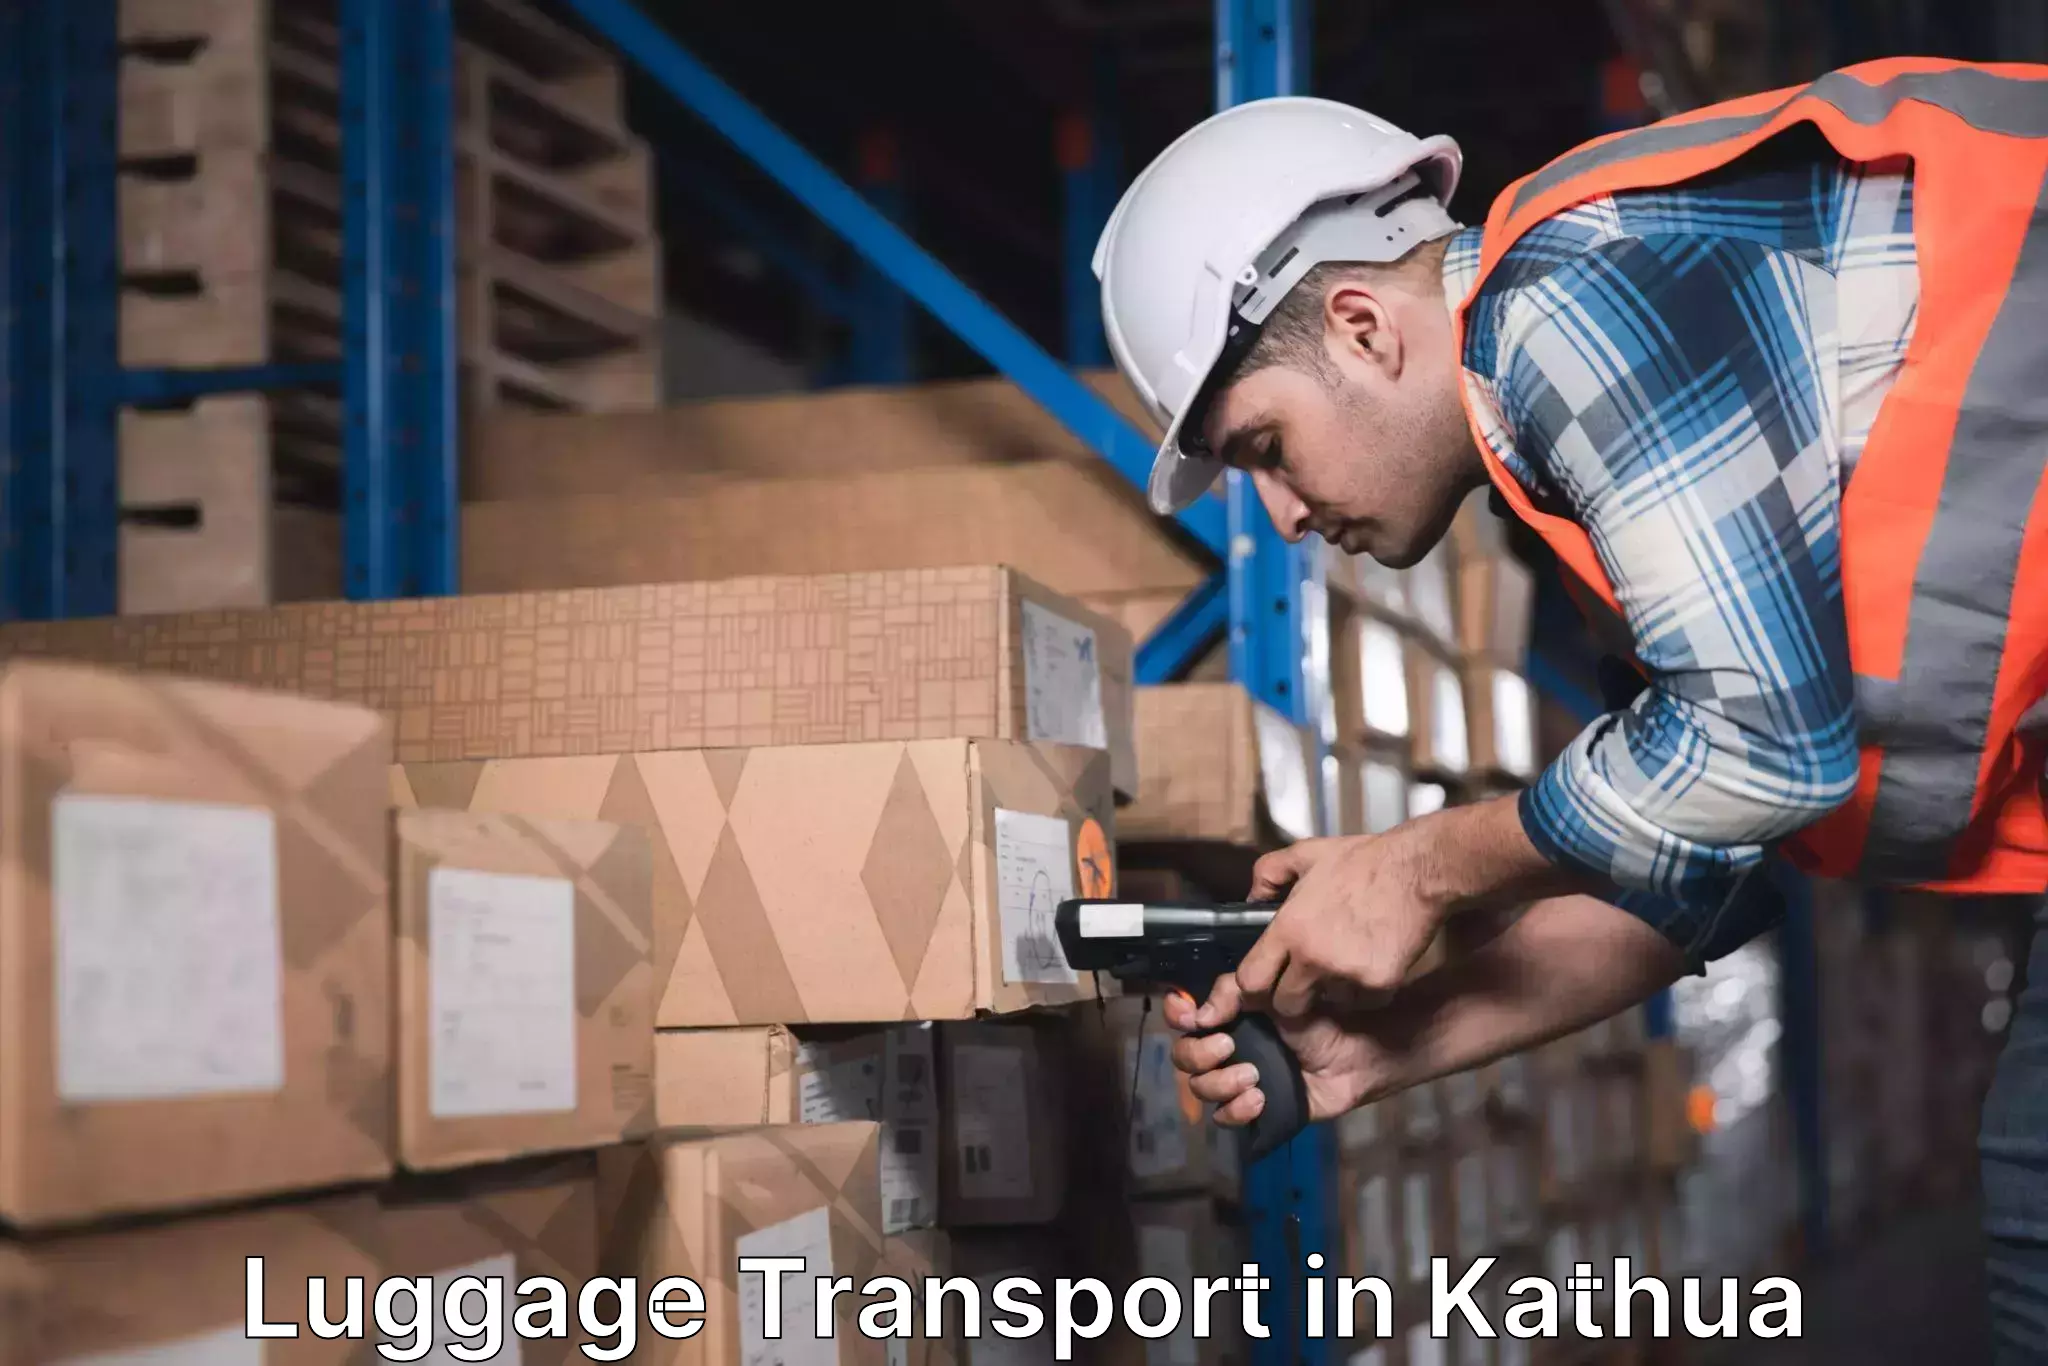 Luggage shipping service in Kathua